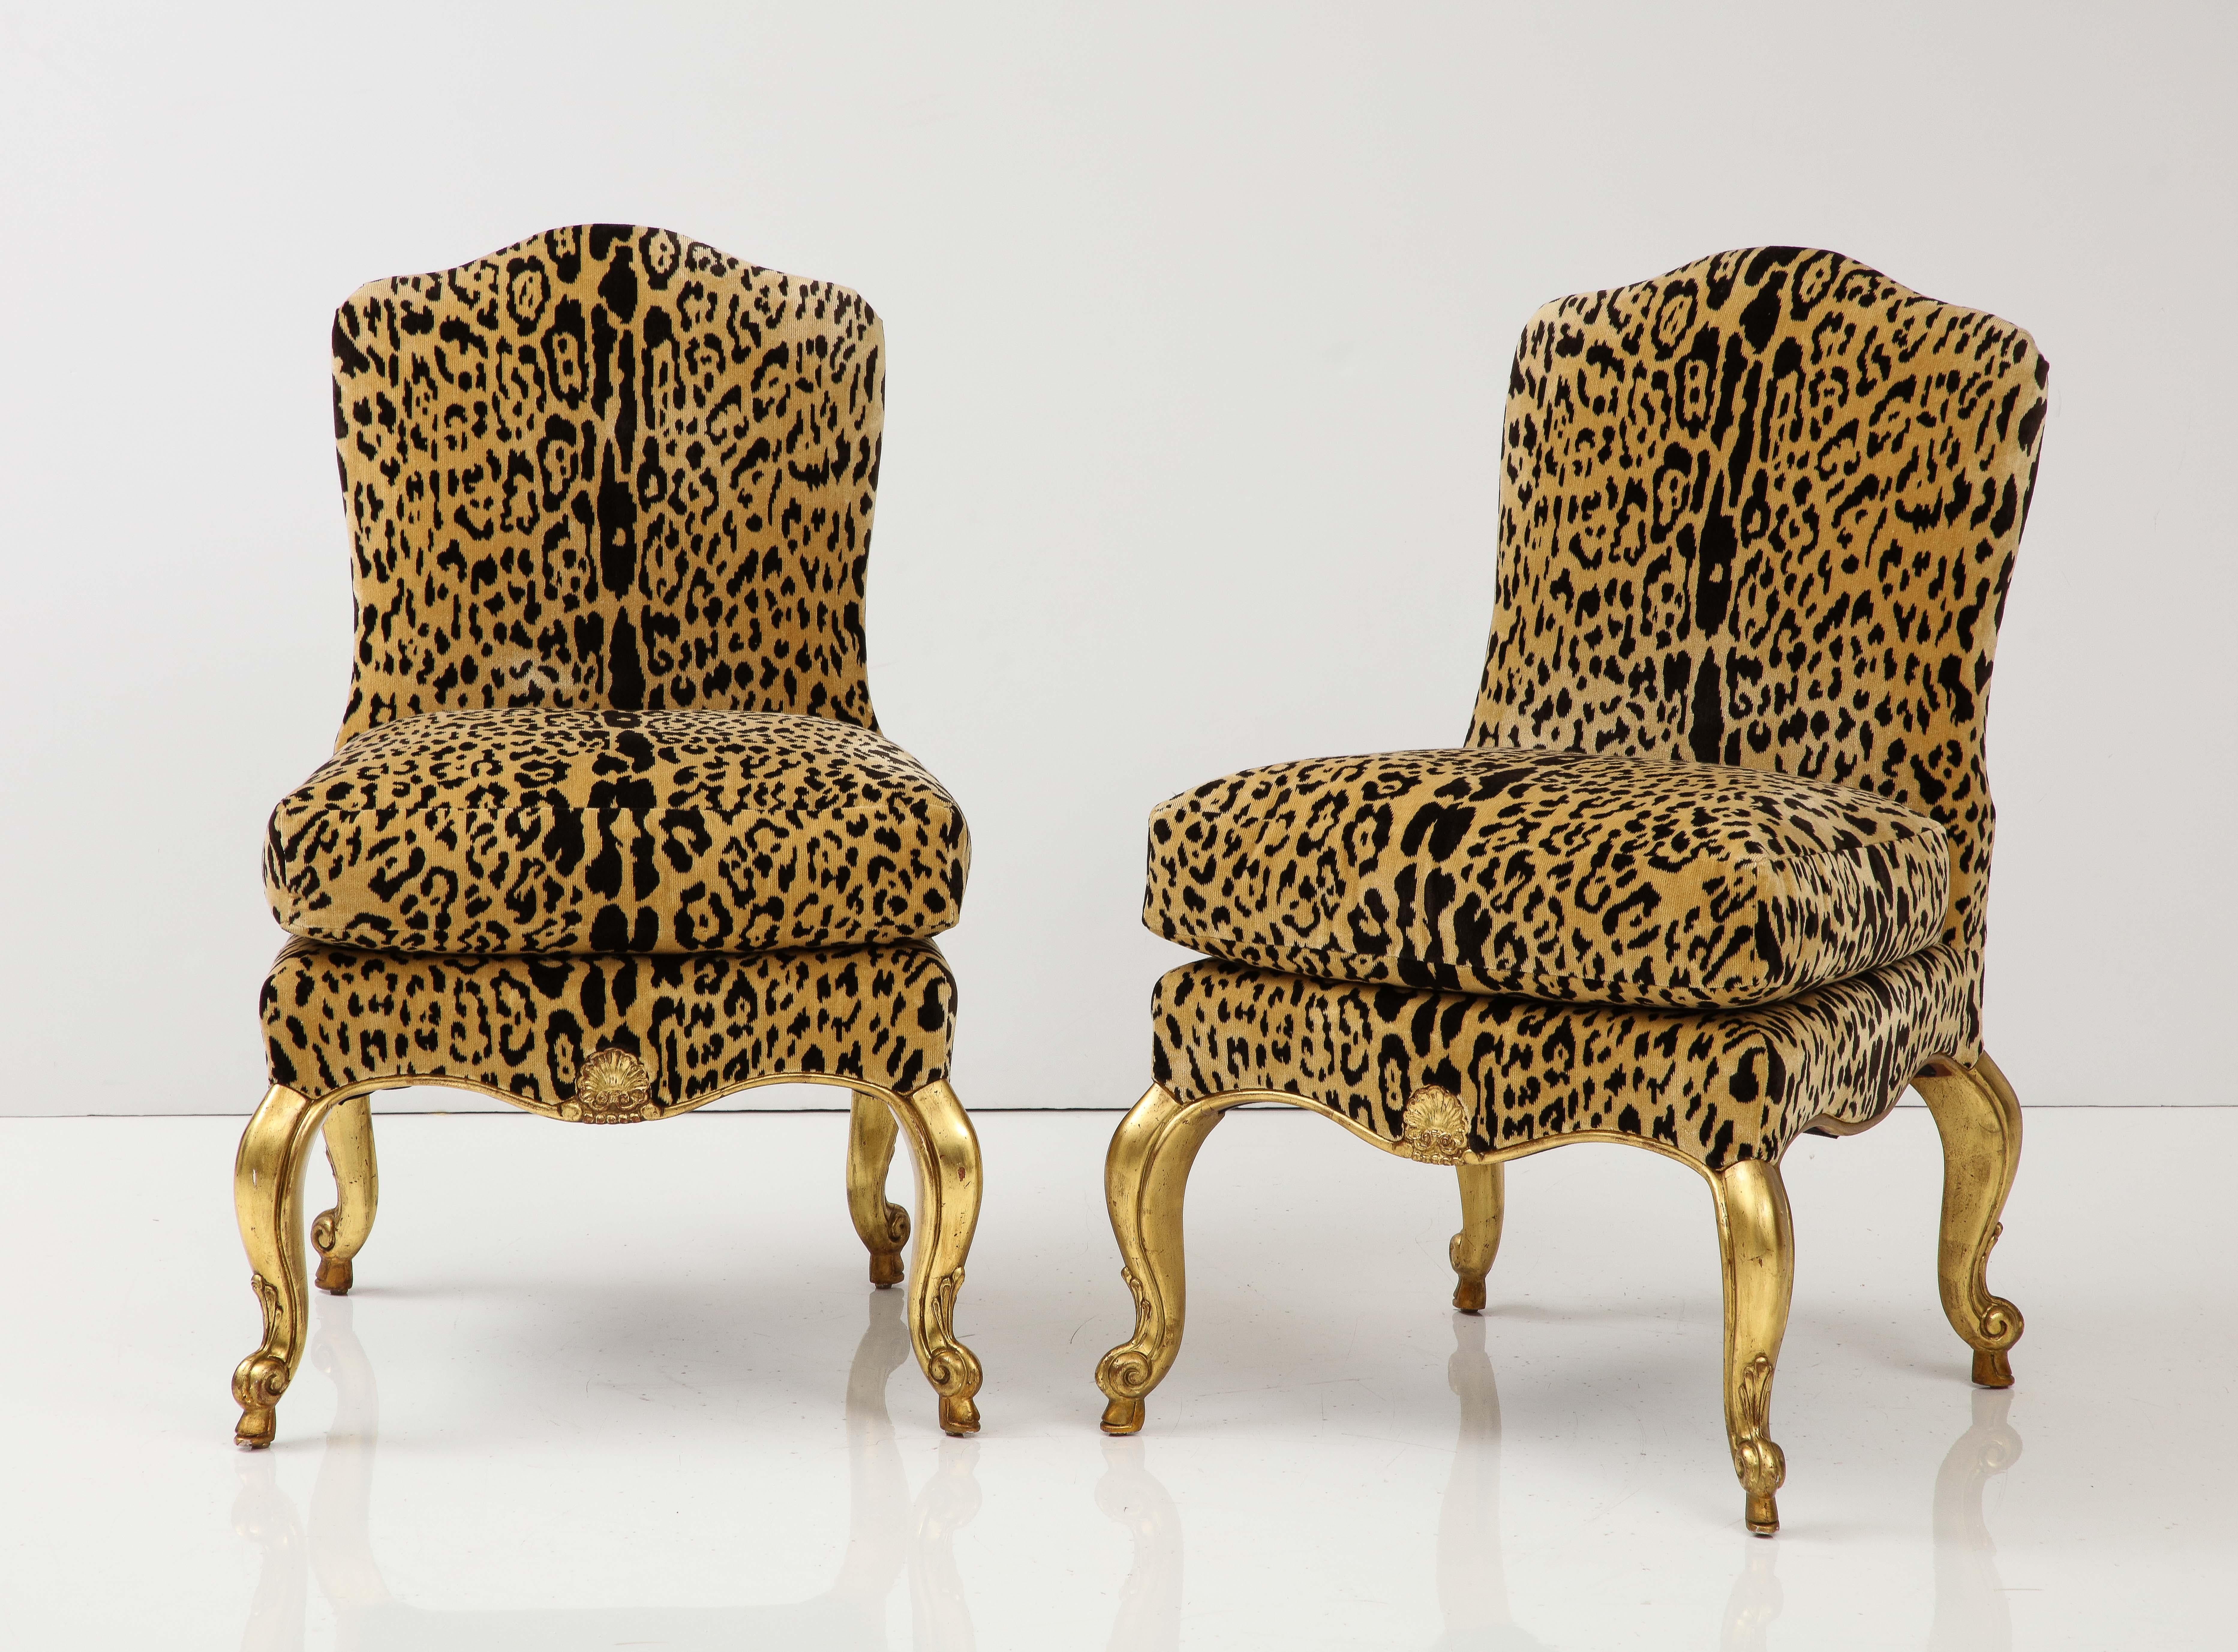 Add star power to any room with this dynamic duo! These slipper chairs in the Louis XV style feature a curved tight back with a loose seat cushion and a scalloped apron raised on gilt wood cabriole legs. The chairs have been recently reupholstered